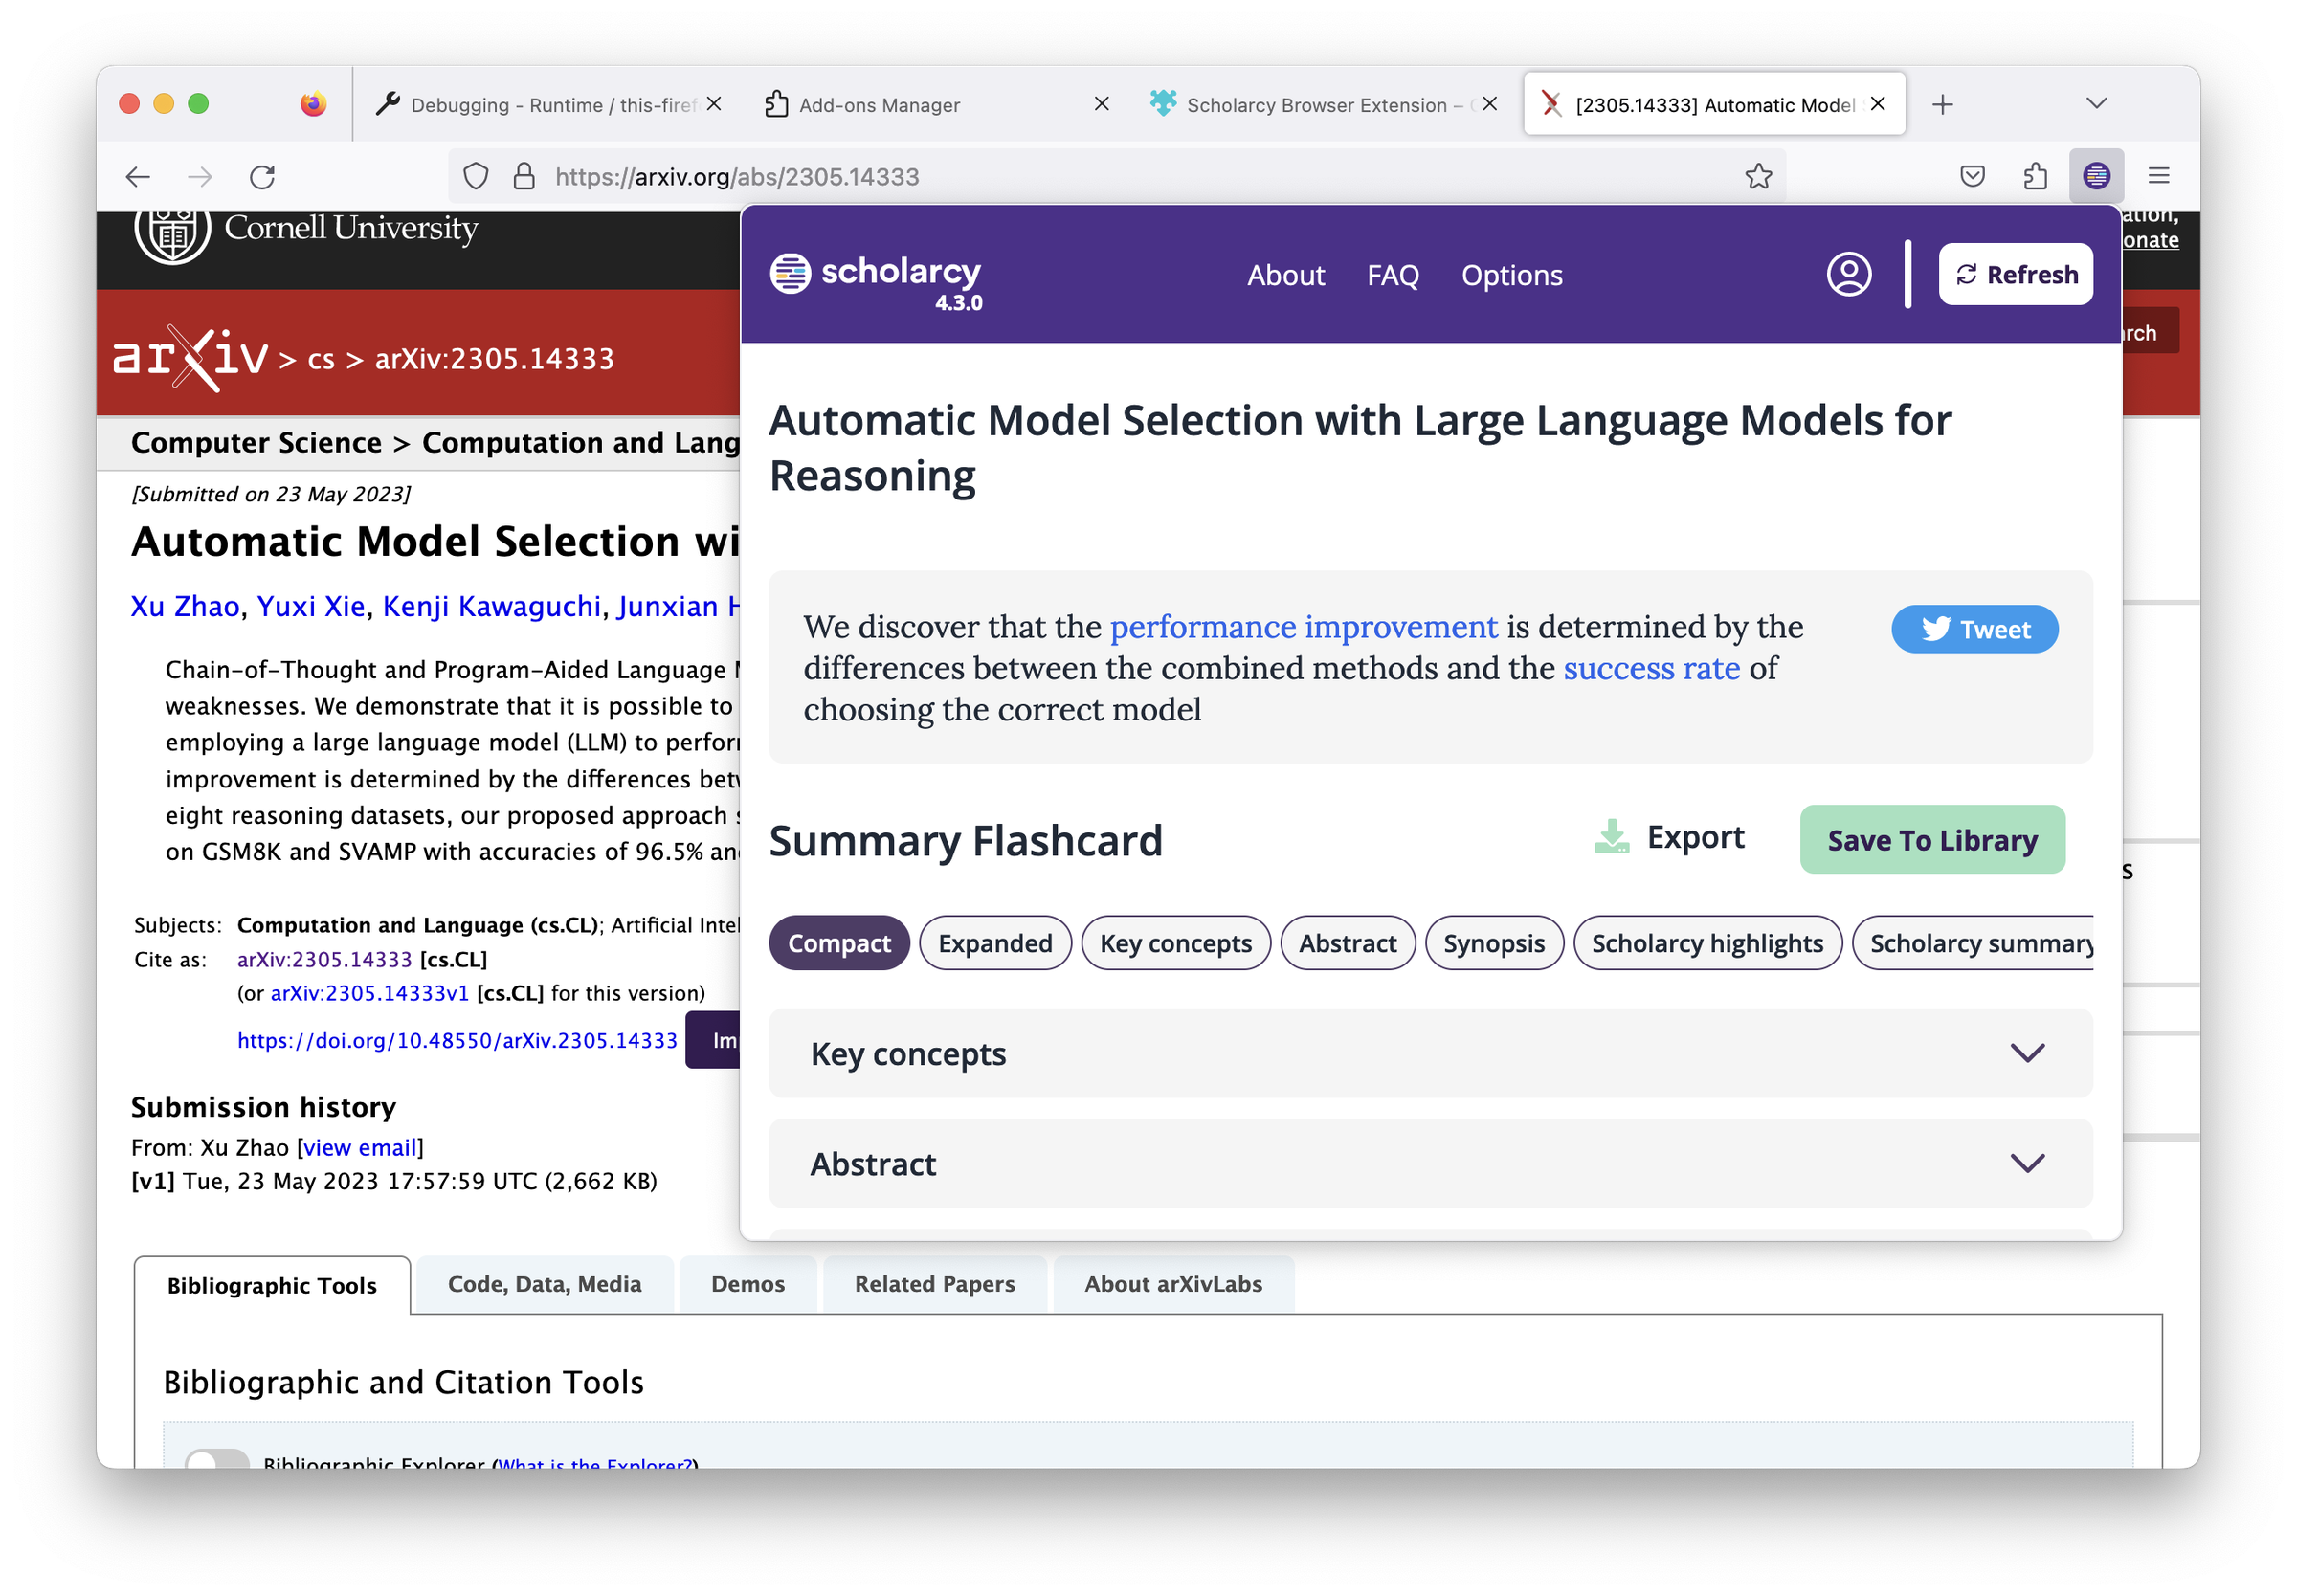 Scholarcy Browser Extension